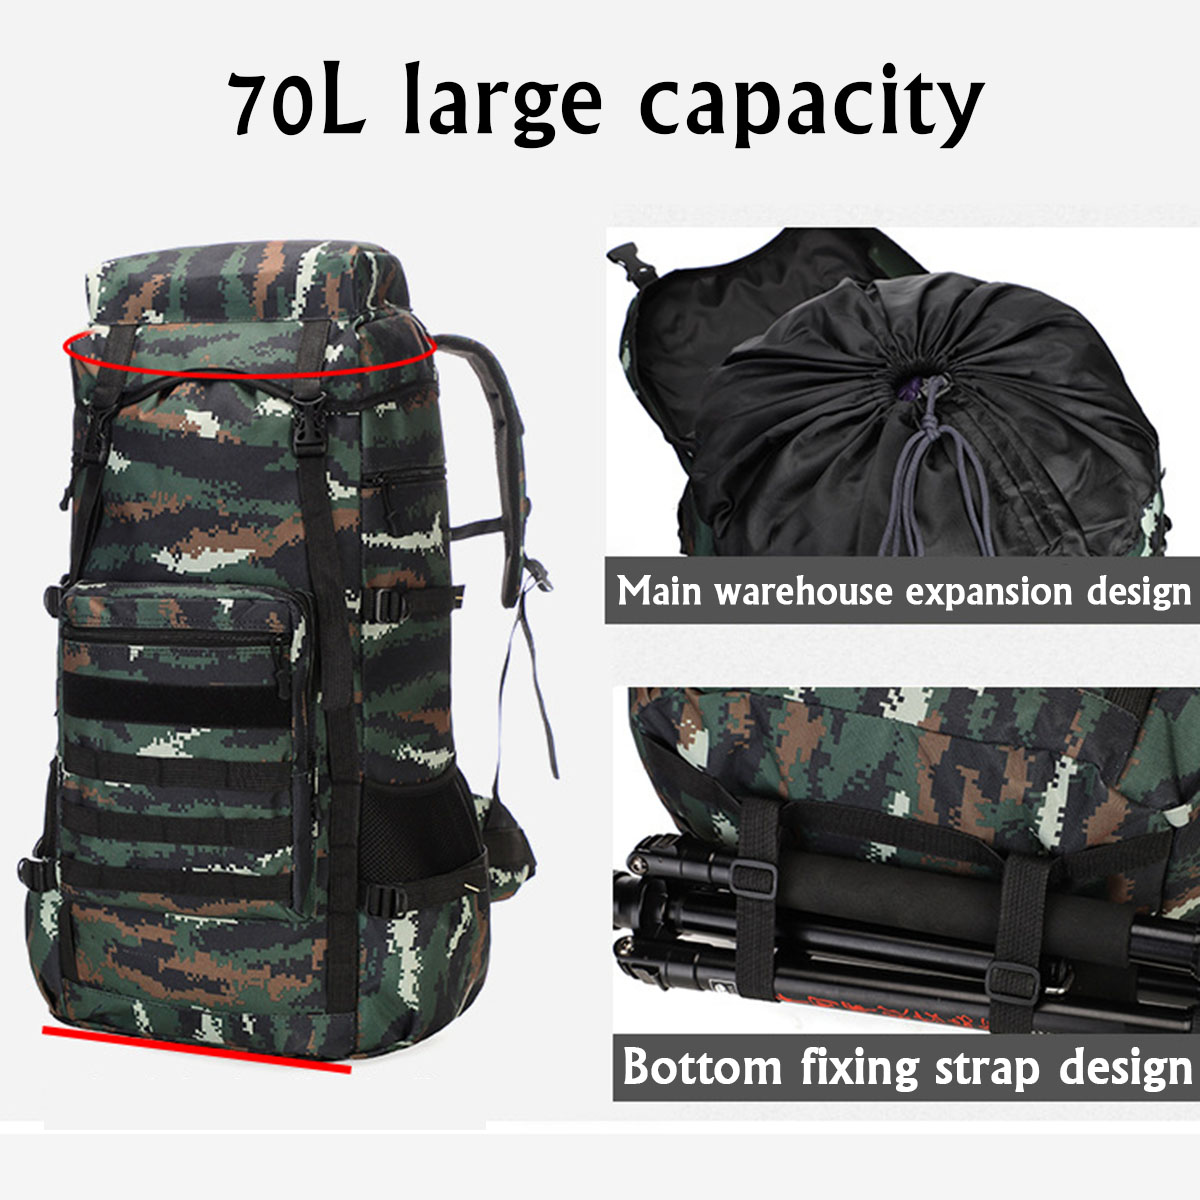 70L-Outdoor-Waterproof-Military-Tactical-Backpack-Camping-Hiking-Backpack-Trekking-Camouflage-Travel-1759458-4